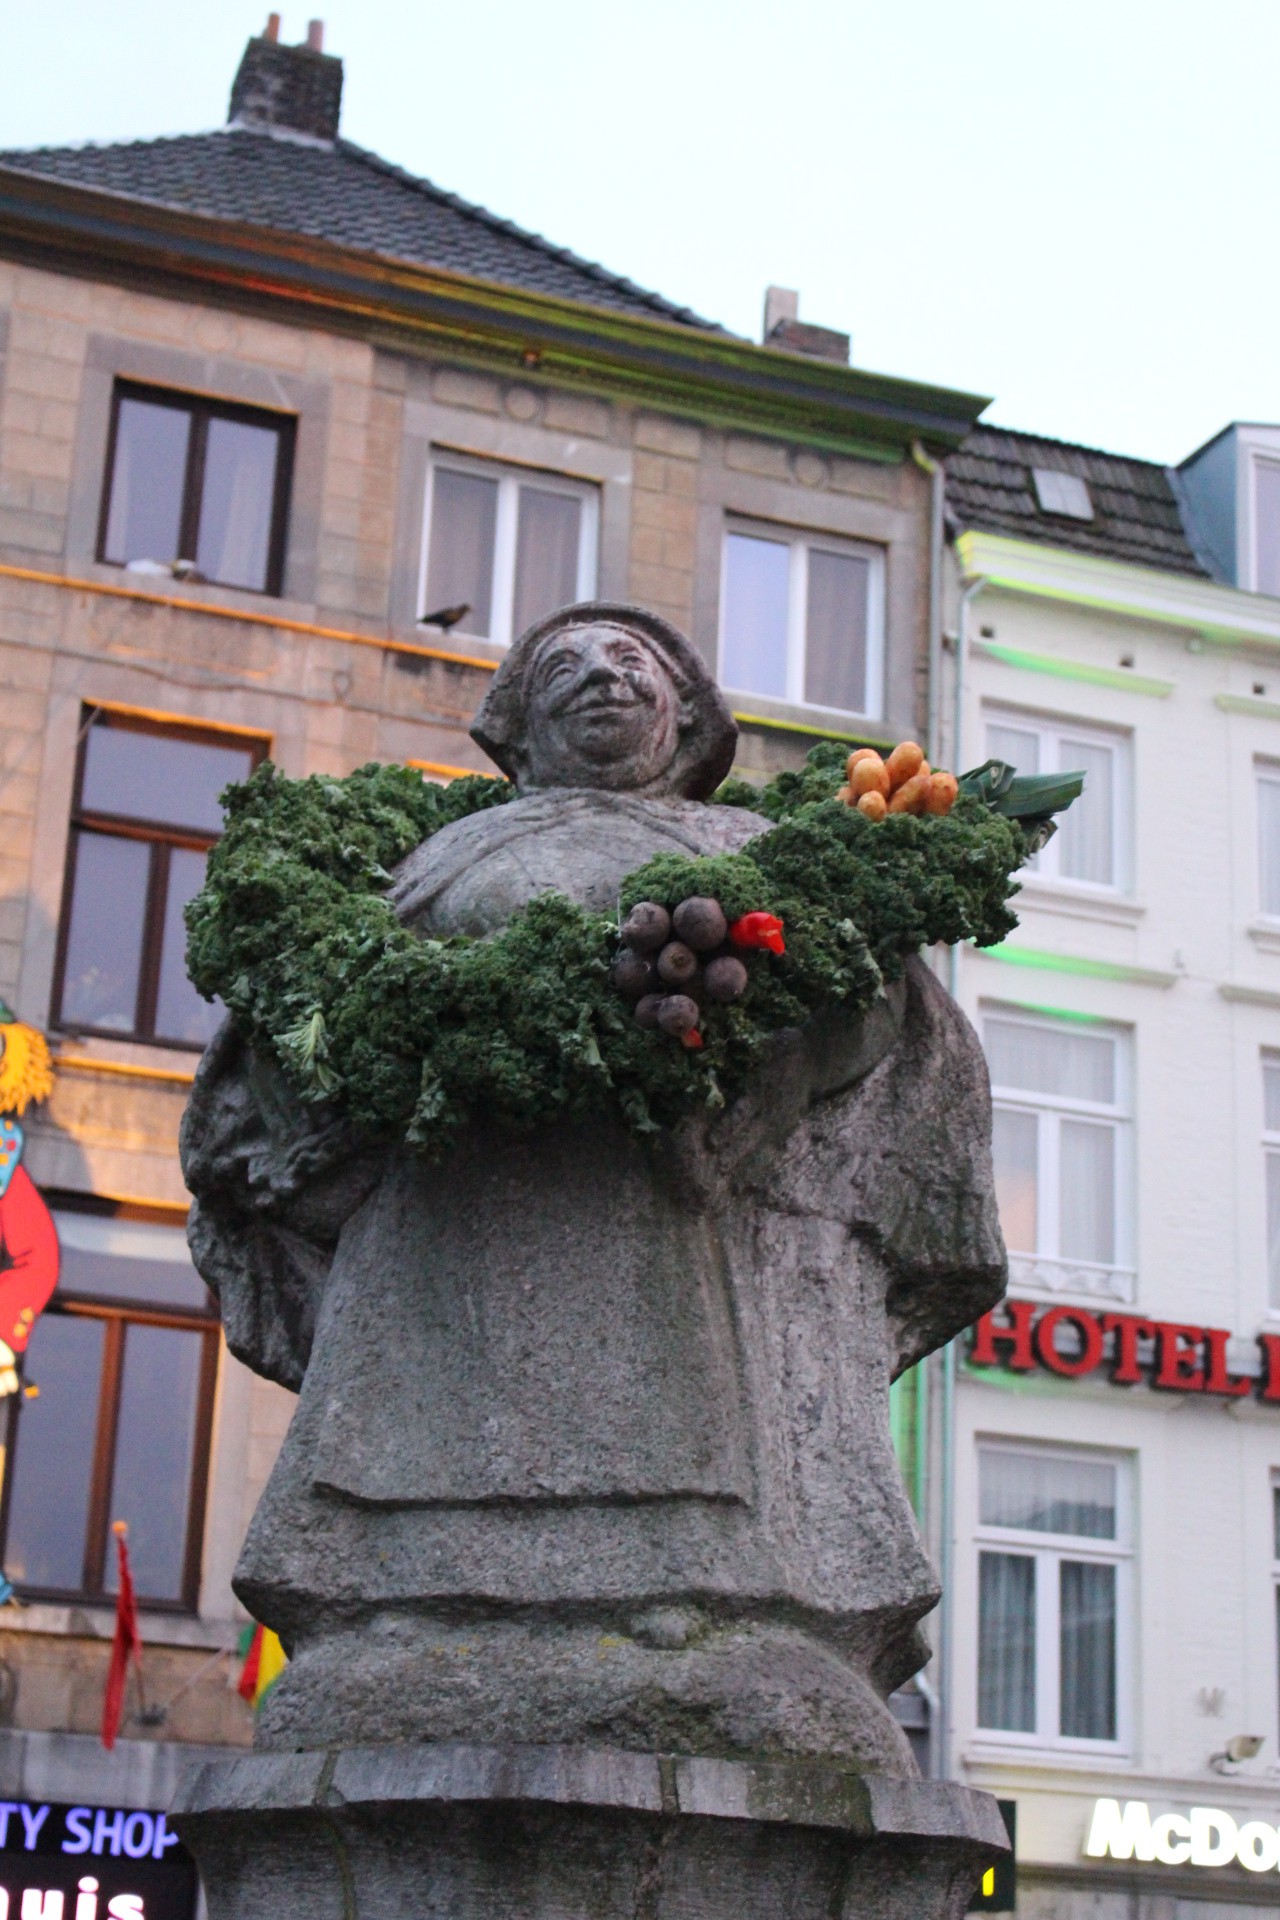 The sculpture representing the market lady on the Market Square in Maastricht. During Carnival, she wears a wreath.